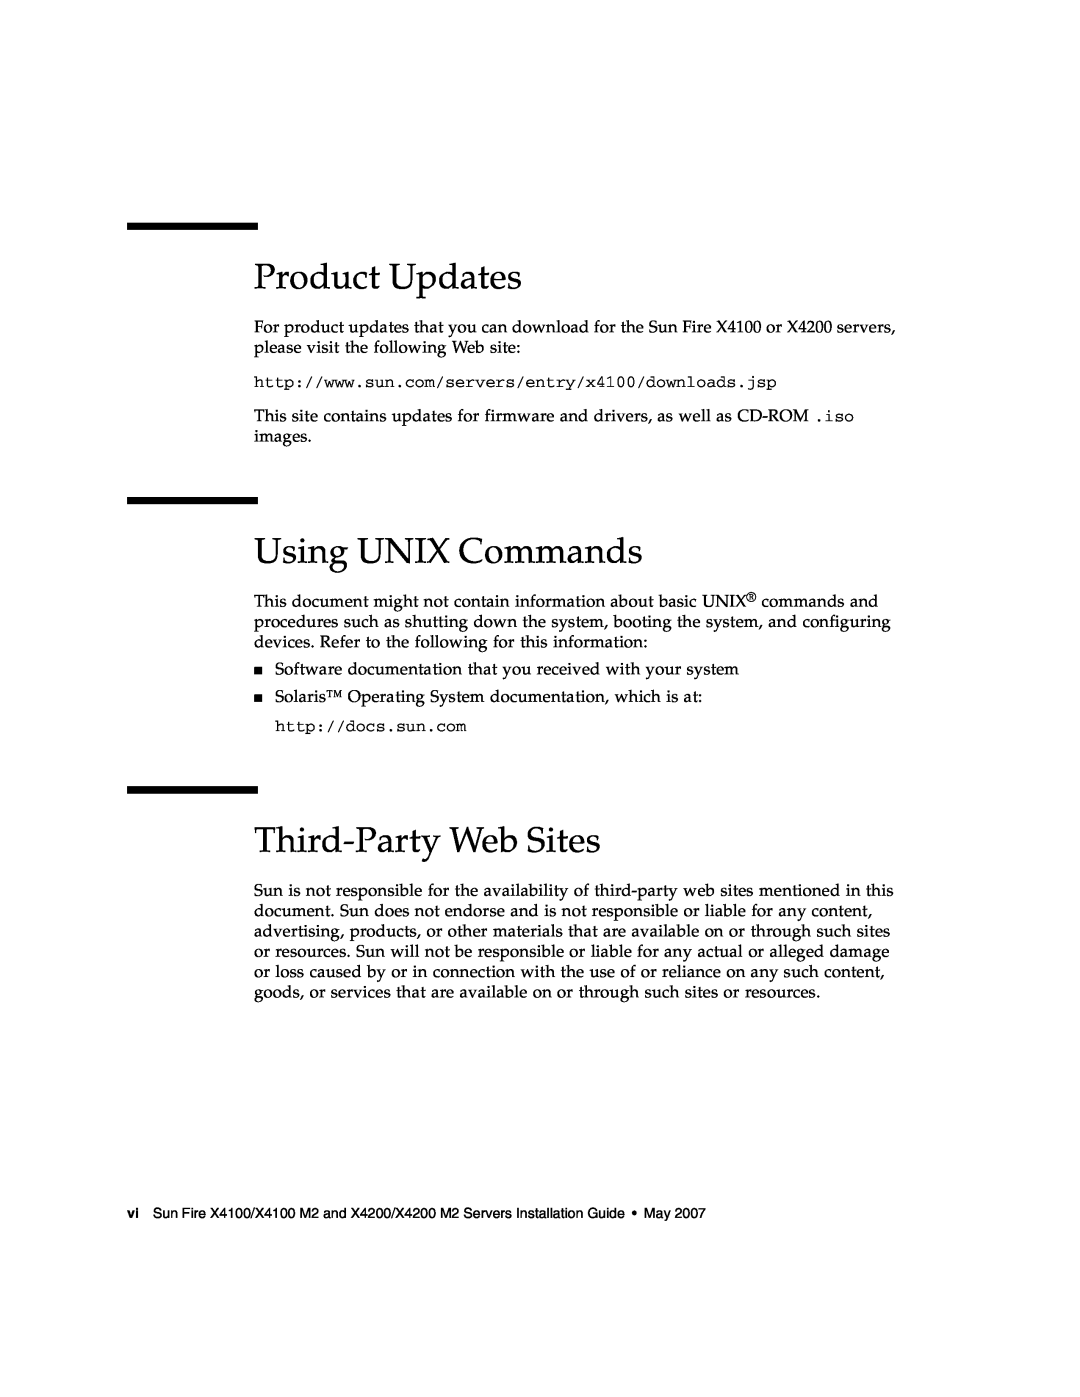 Sun Microsystems X4200 M2, X4100 M2 manual Product Updates, Using UNIX Commands, Third-Party Web Sites 